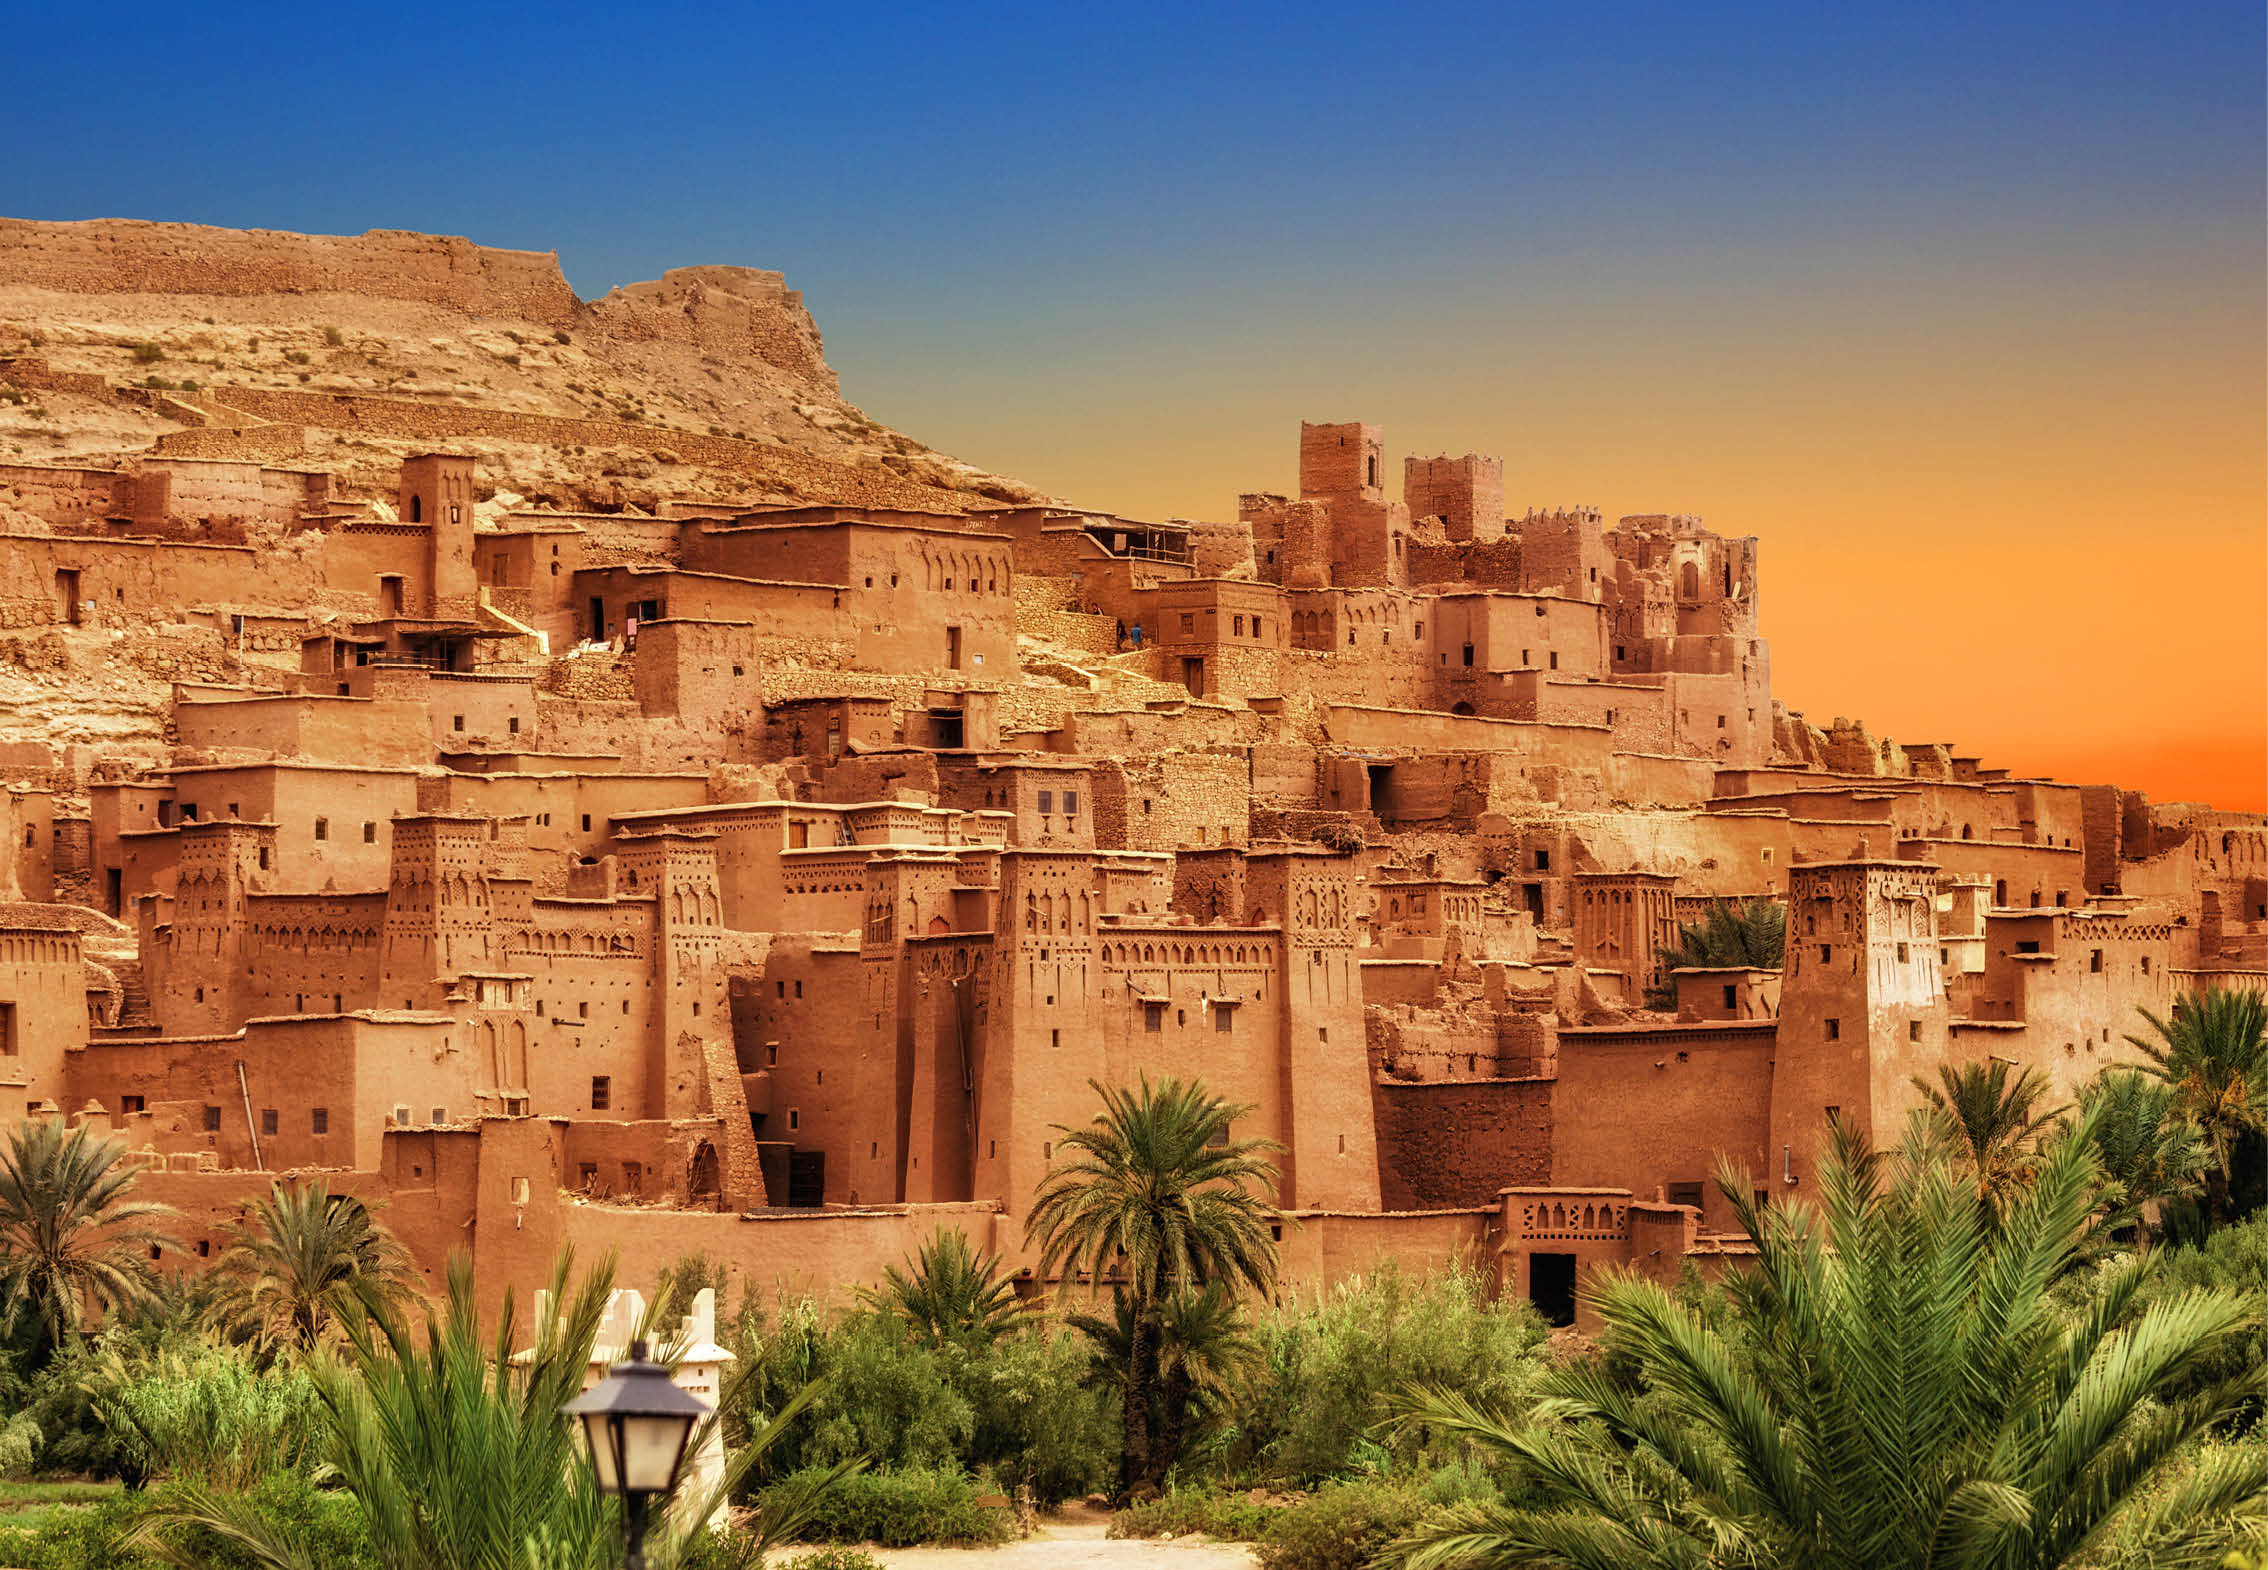 Kasbah Ait Ben Haddou in the Atlas Mountains of Morocco  UNESCO World Heritage Site since 1987  Several films have been shot there